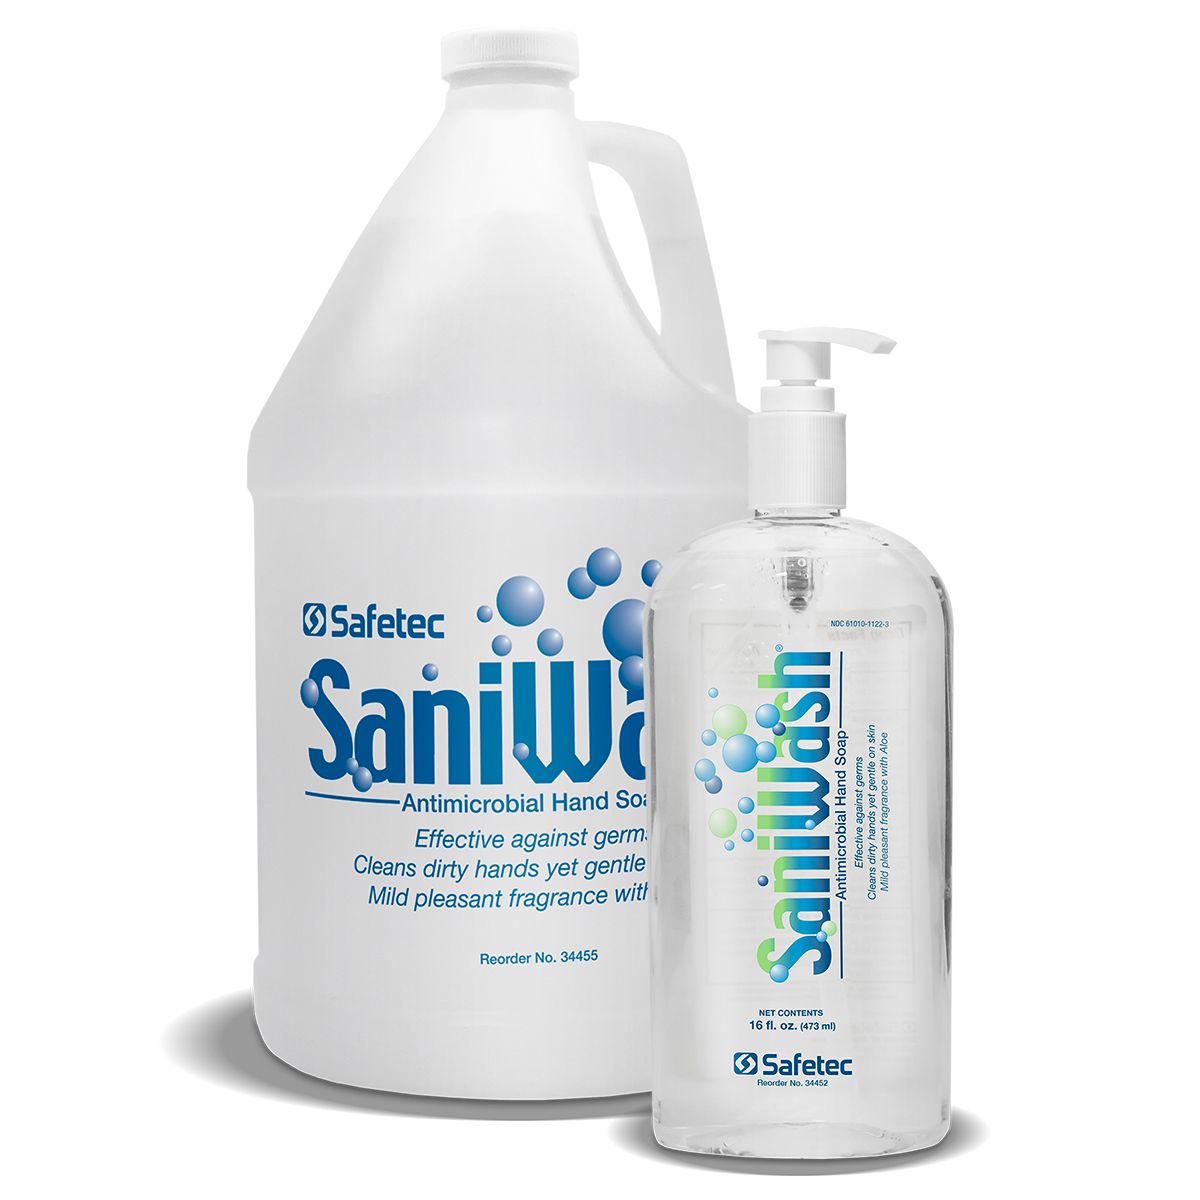 34452 and 34452 Safetec® SaniWash® Antimicrobial Hand Soap 